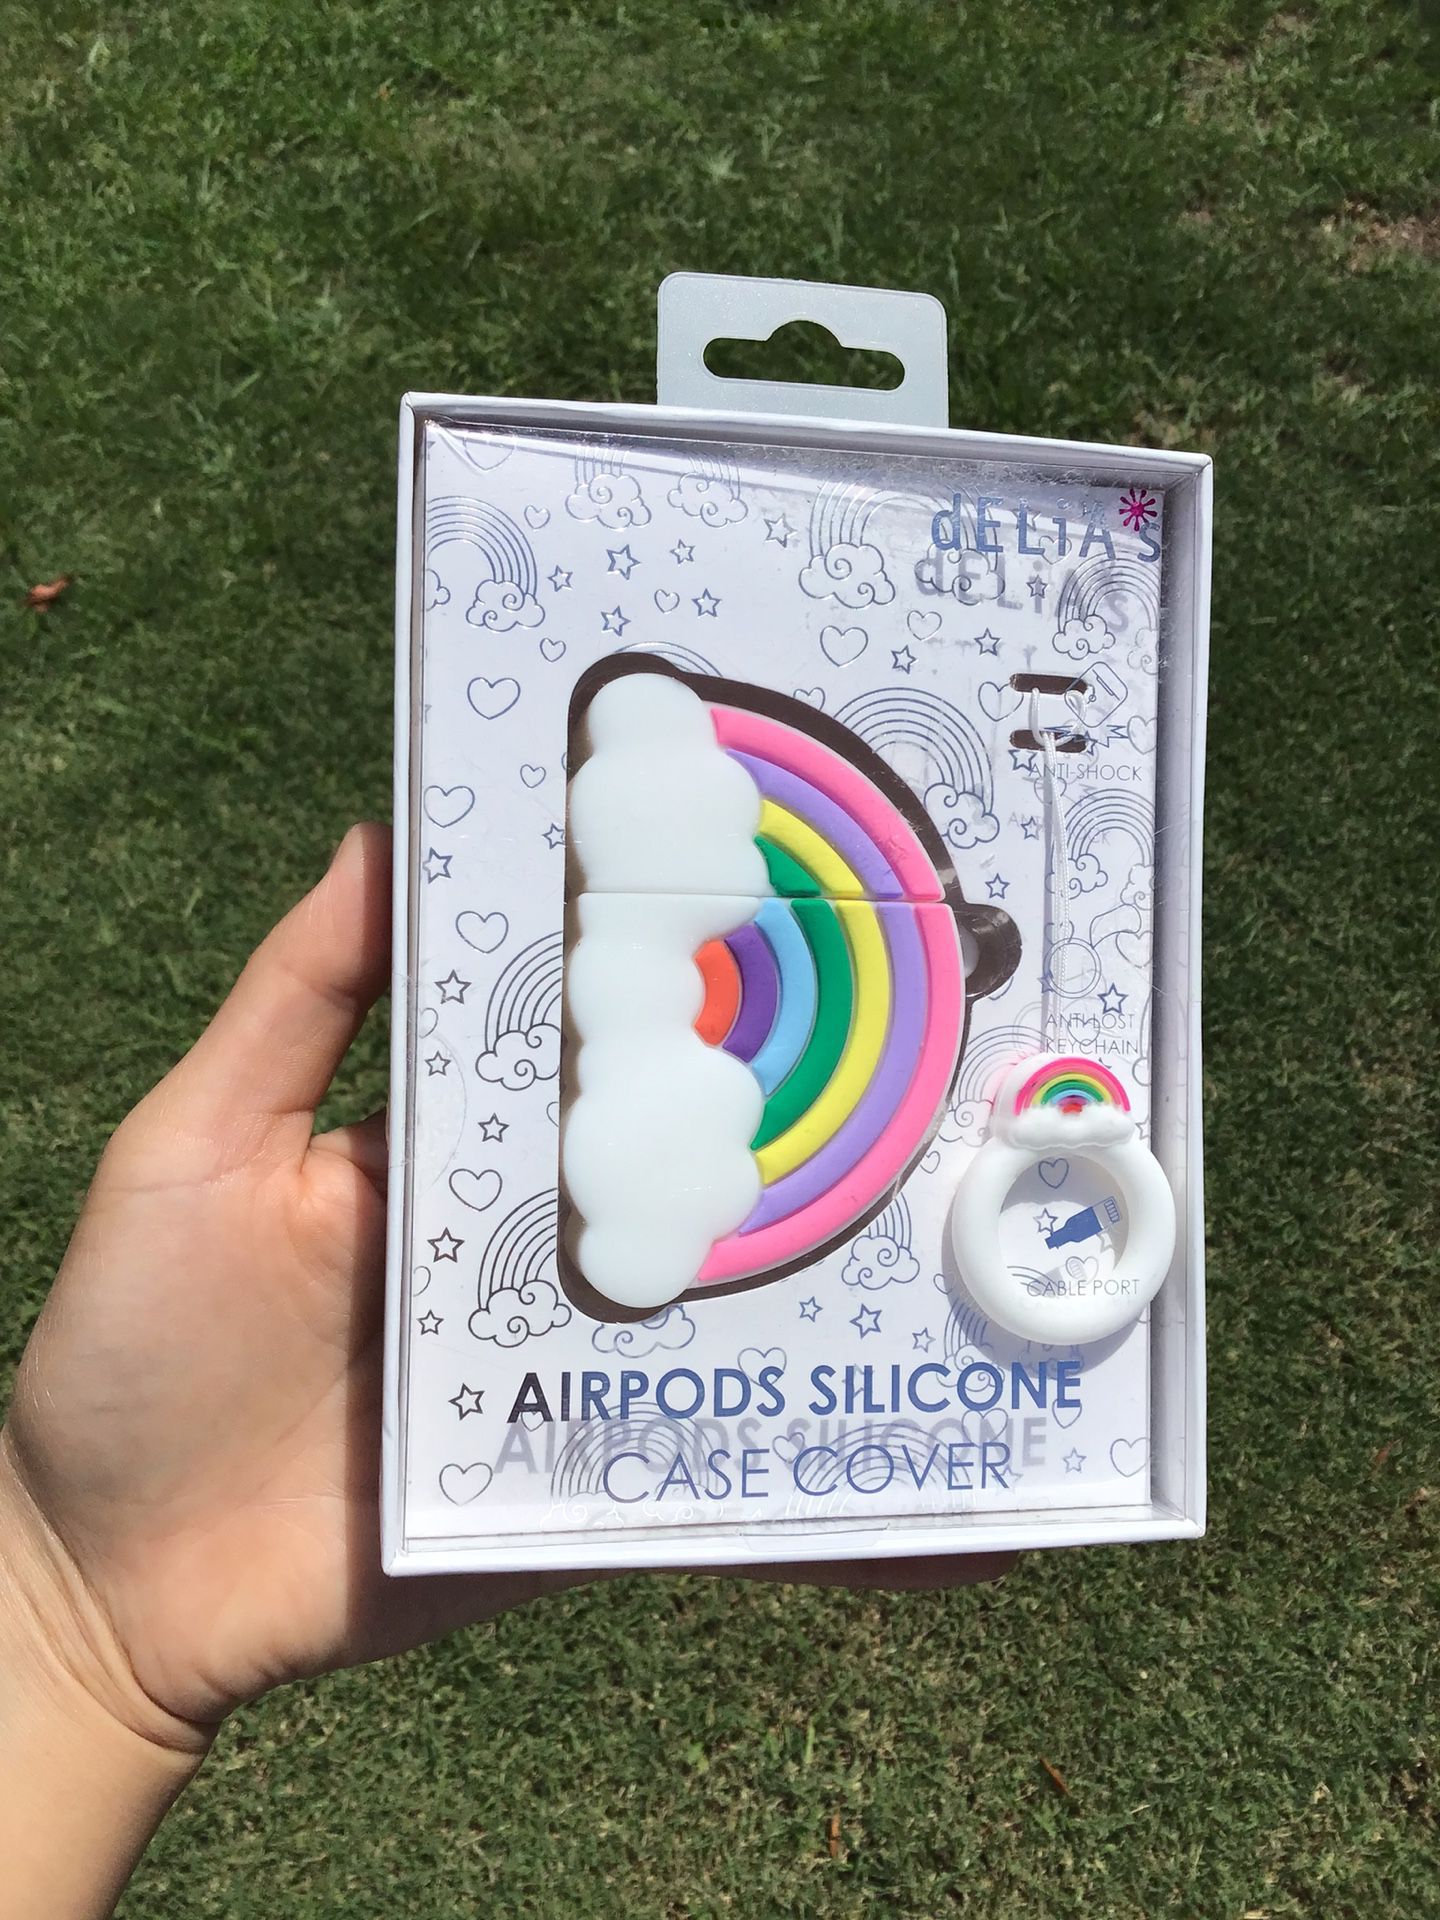 Rainbow AirPods Case Apple iPod iPad iPhone AirPod Case Earbuds Ear Phones Phone Electronics Media Music Accessories Samsung Galaxy 